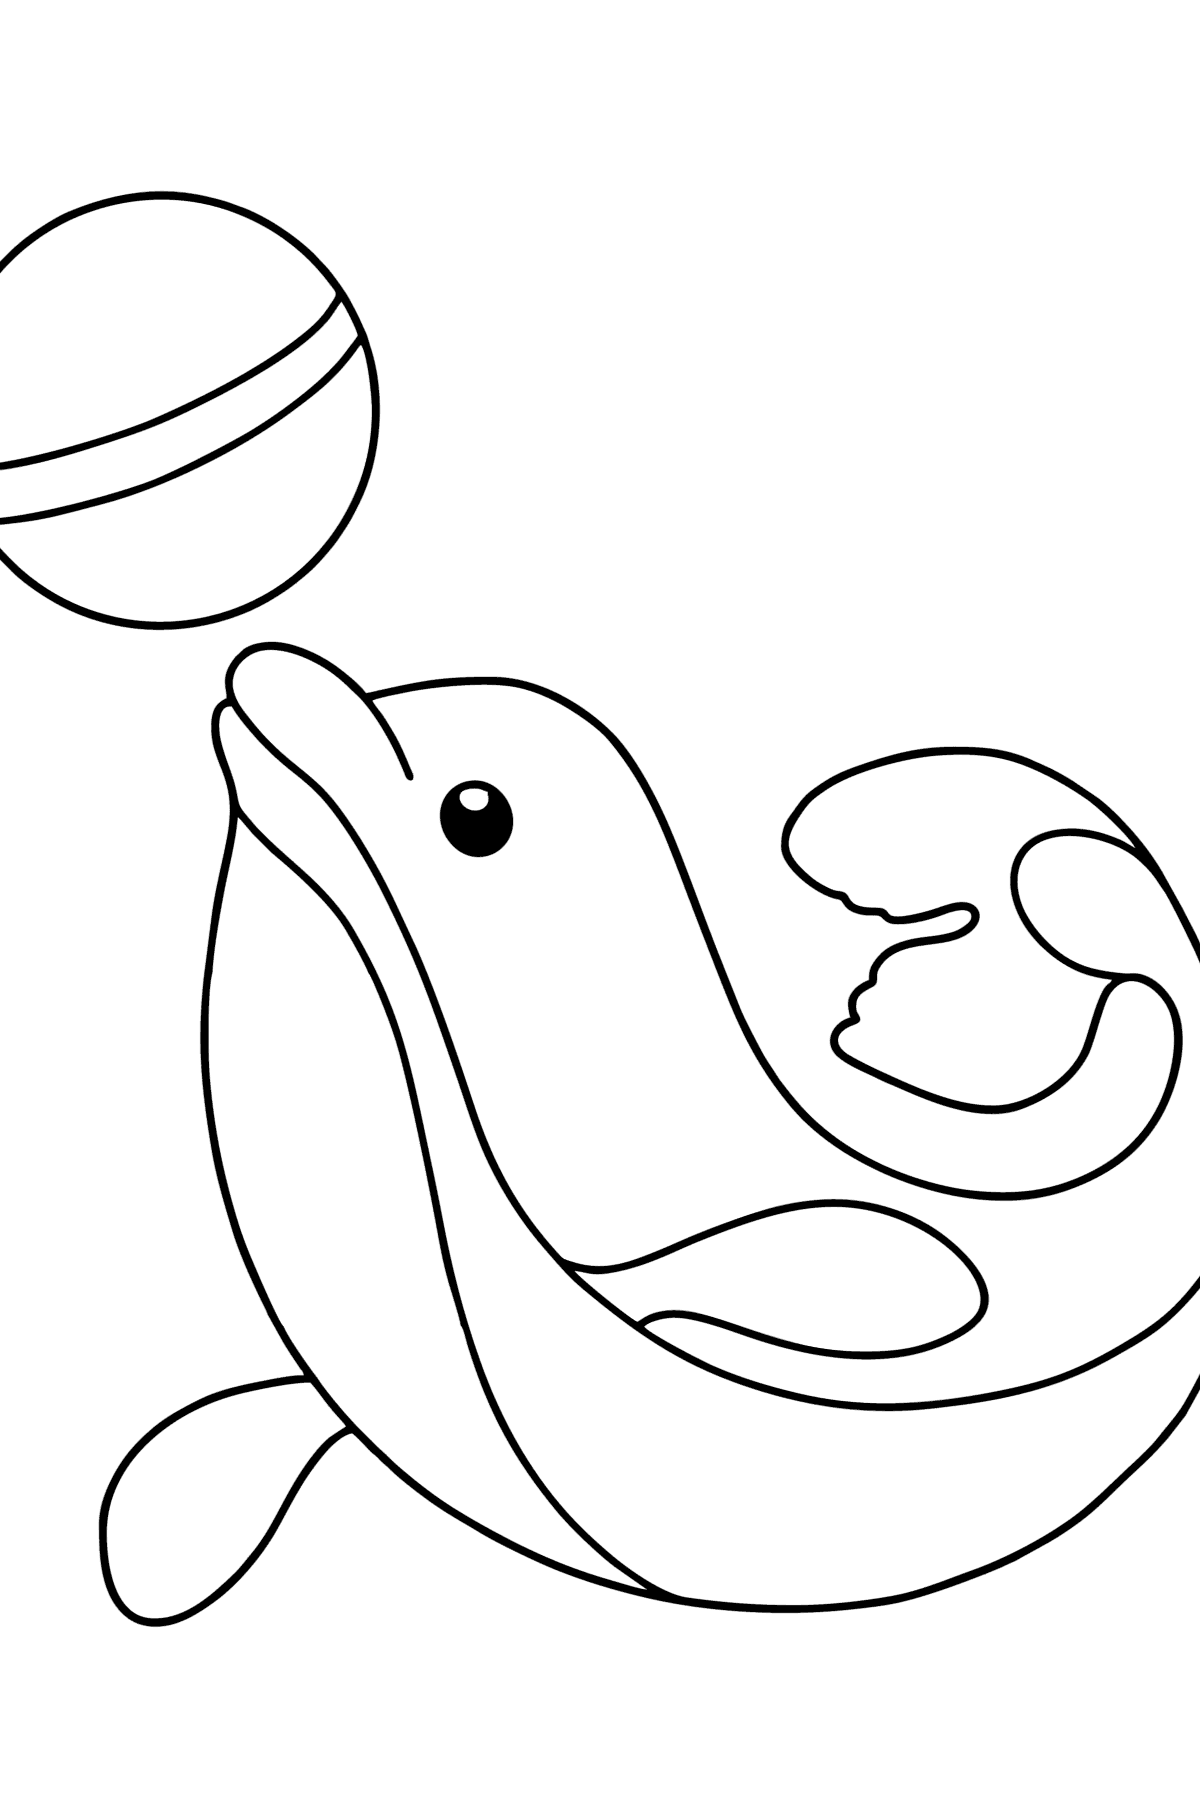 Dolphin is Performing coloring page - Coloring Pages for Kids